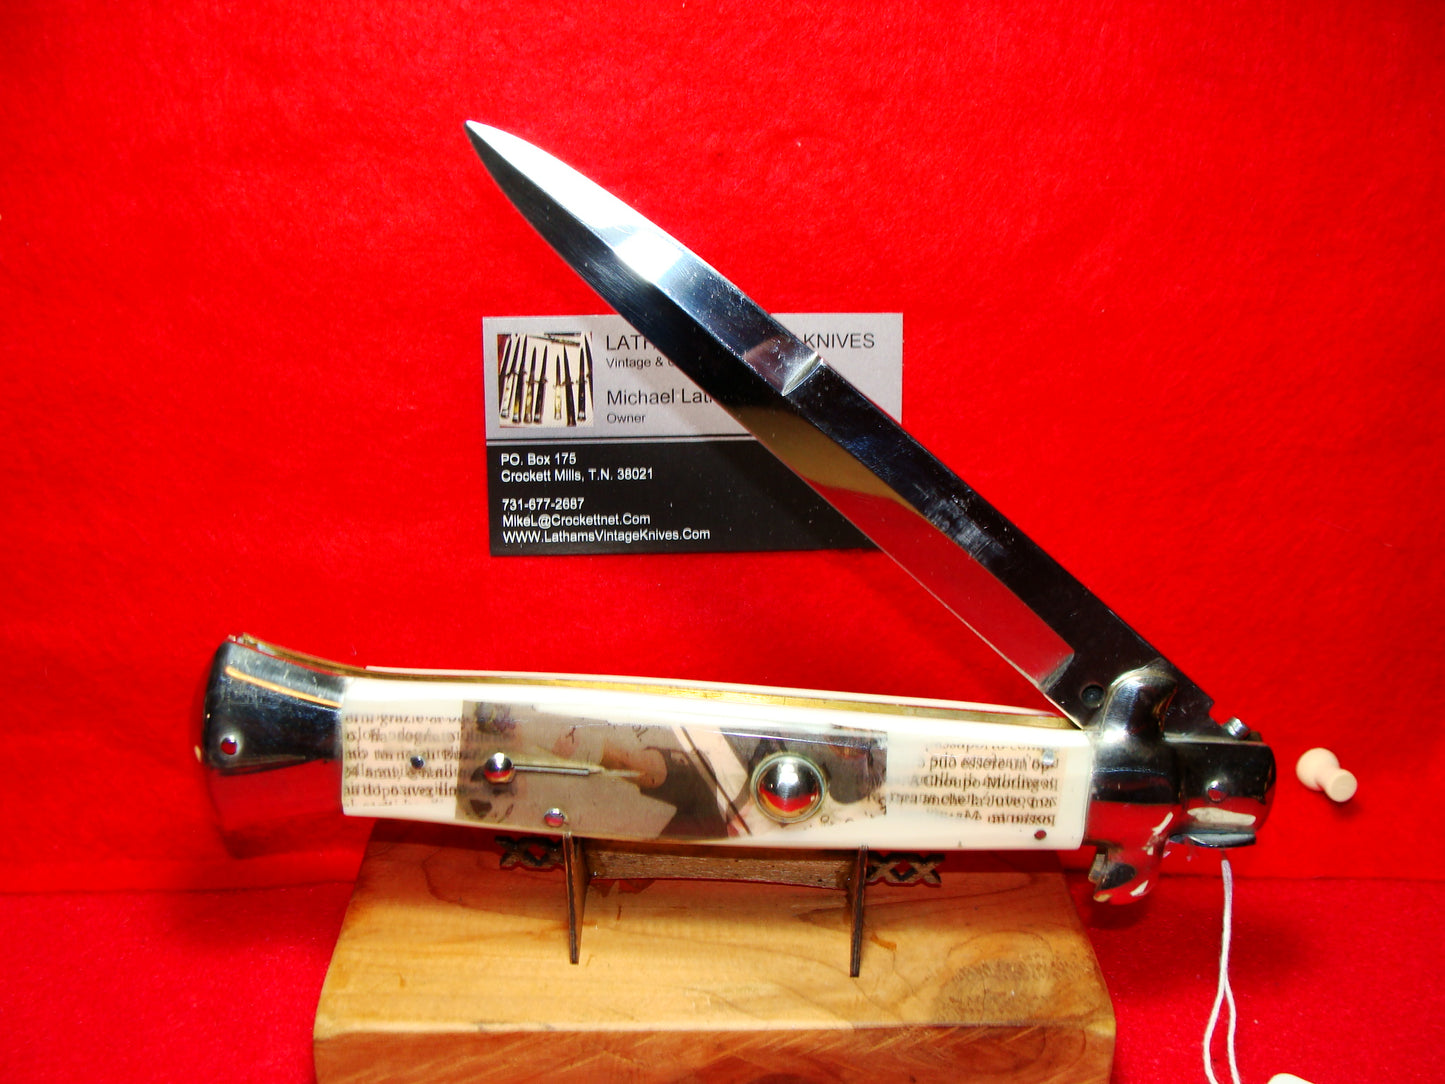 A.G.A. CAMPOLIN MADE IN ITALY 2010-2015 PICK LOCK STILETTO 38 CM ITALIAN AUTOMATIC KNIFE PICTURE ART HANDLES